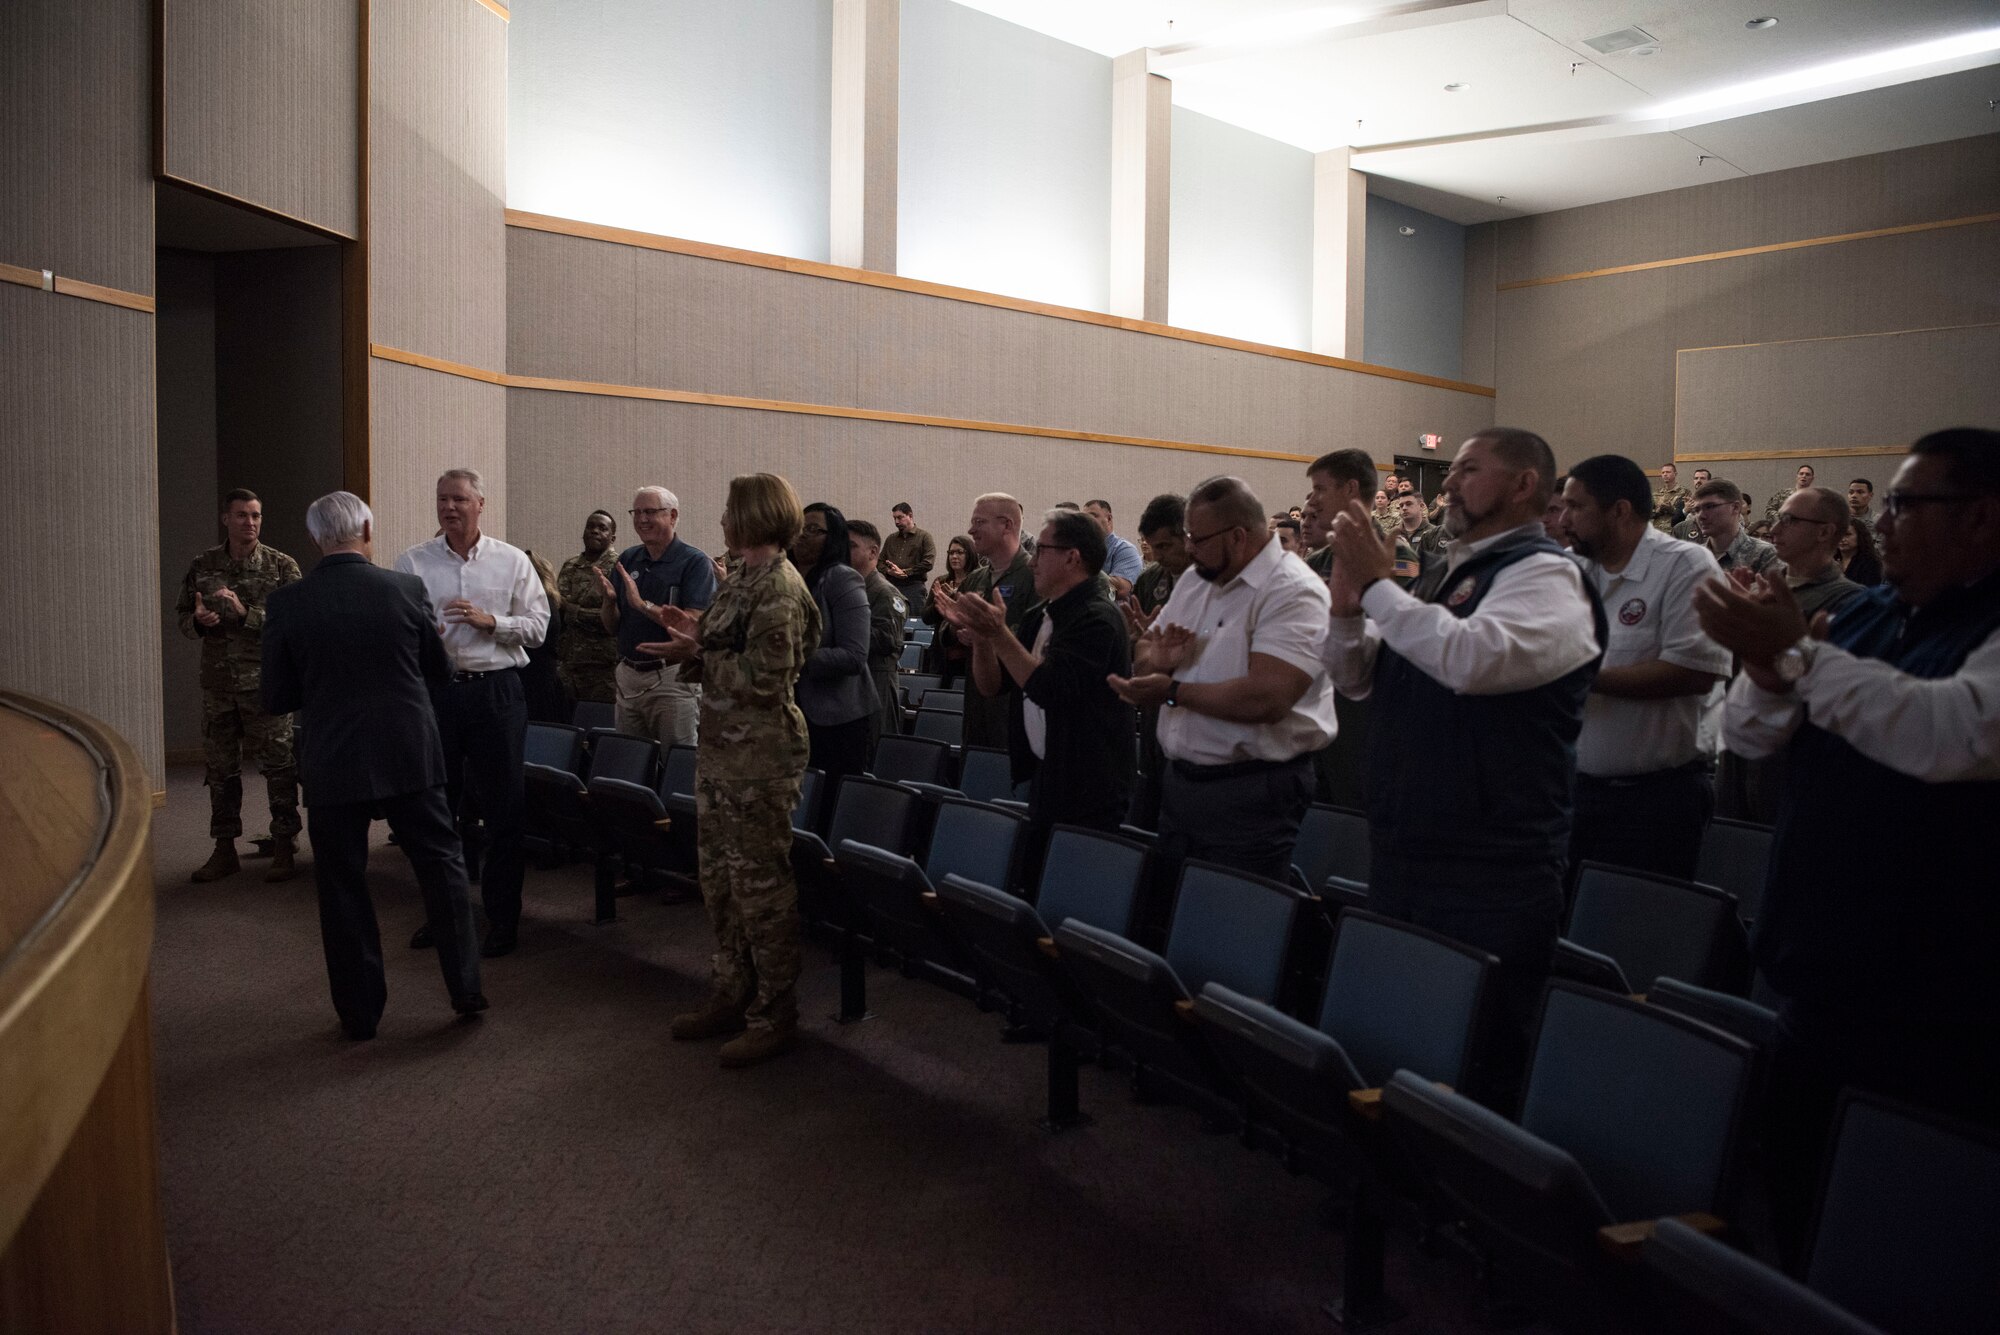 U.S. Air Force retired Lt. Col. Barry Bridger, former Prisoner of War, thanks members of Team XL for their hospitality at Laughlin Air Force Base, Texas, Oct. 23, 2019. Bridger spoke to members of Team XL about his time as a POW in the infamous Hanoi Hilton. (U.S. Air Force photo by Senior Airman Marco A. Gomez)